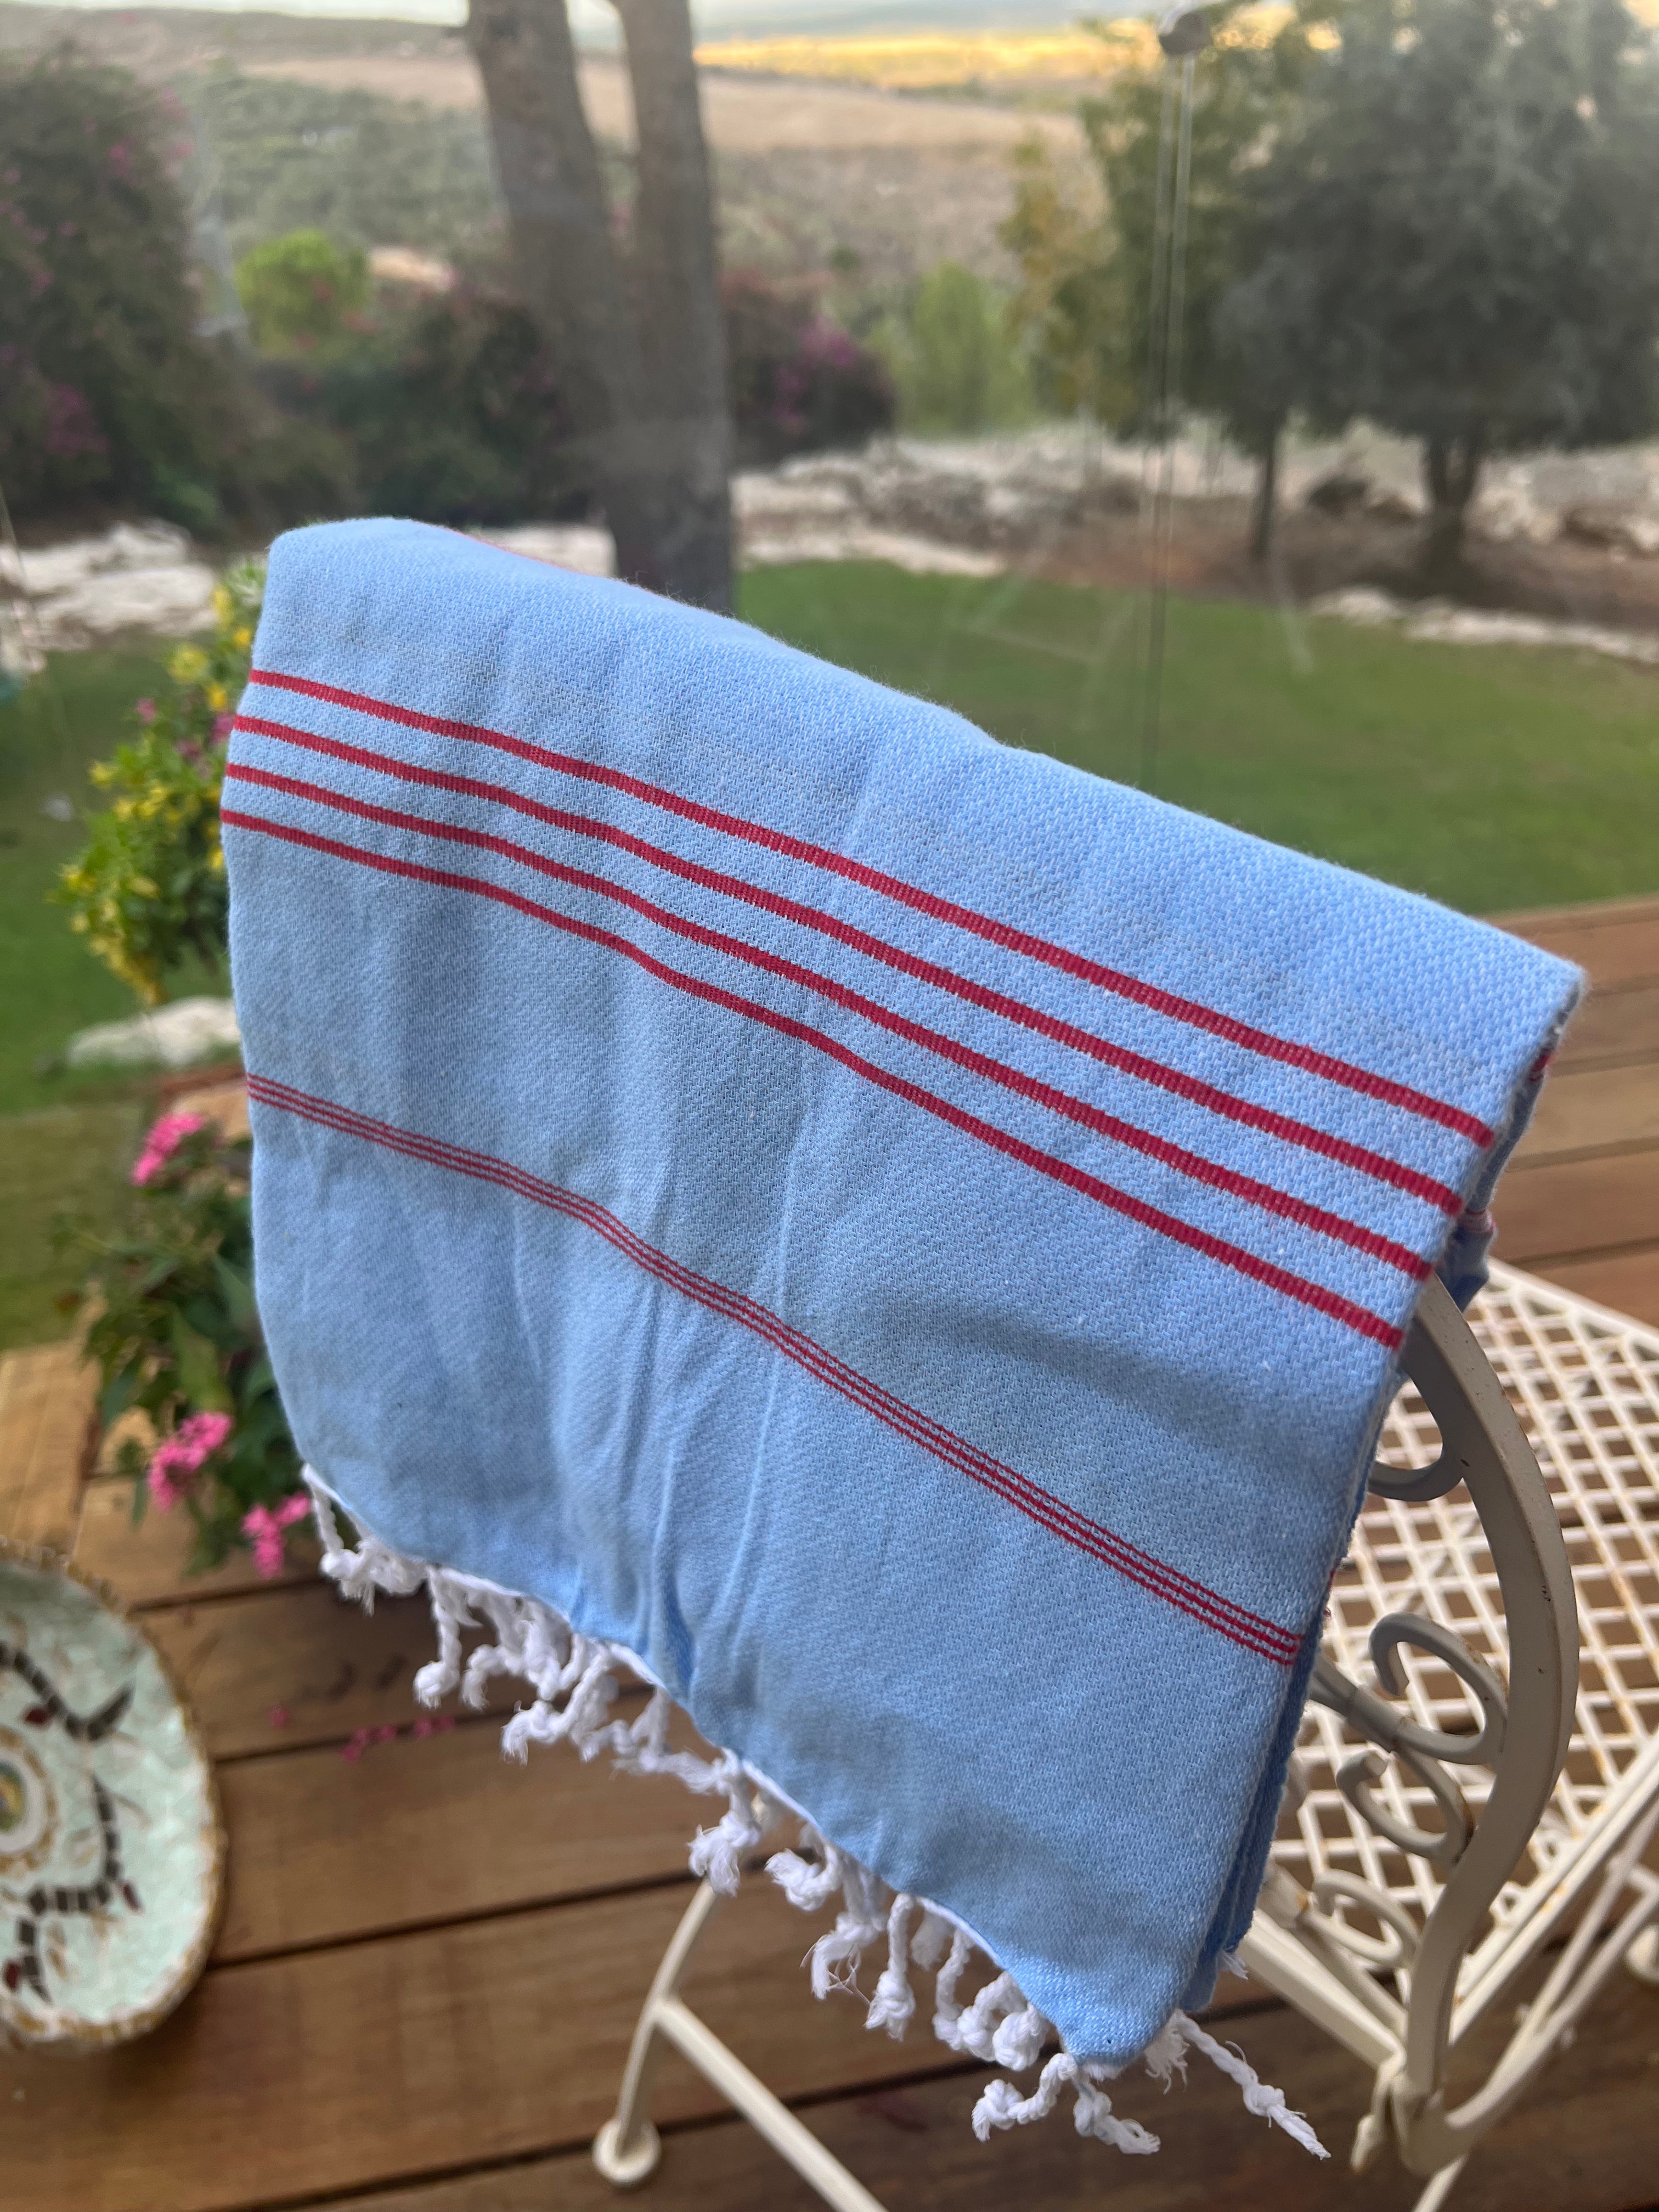 The light Blue jeans Red Stripes beach towel